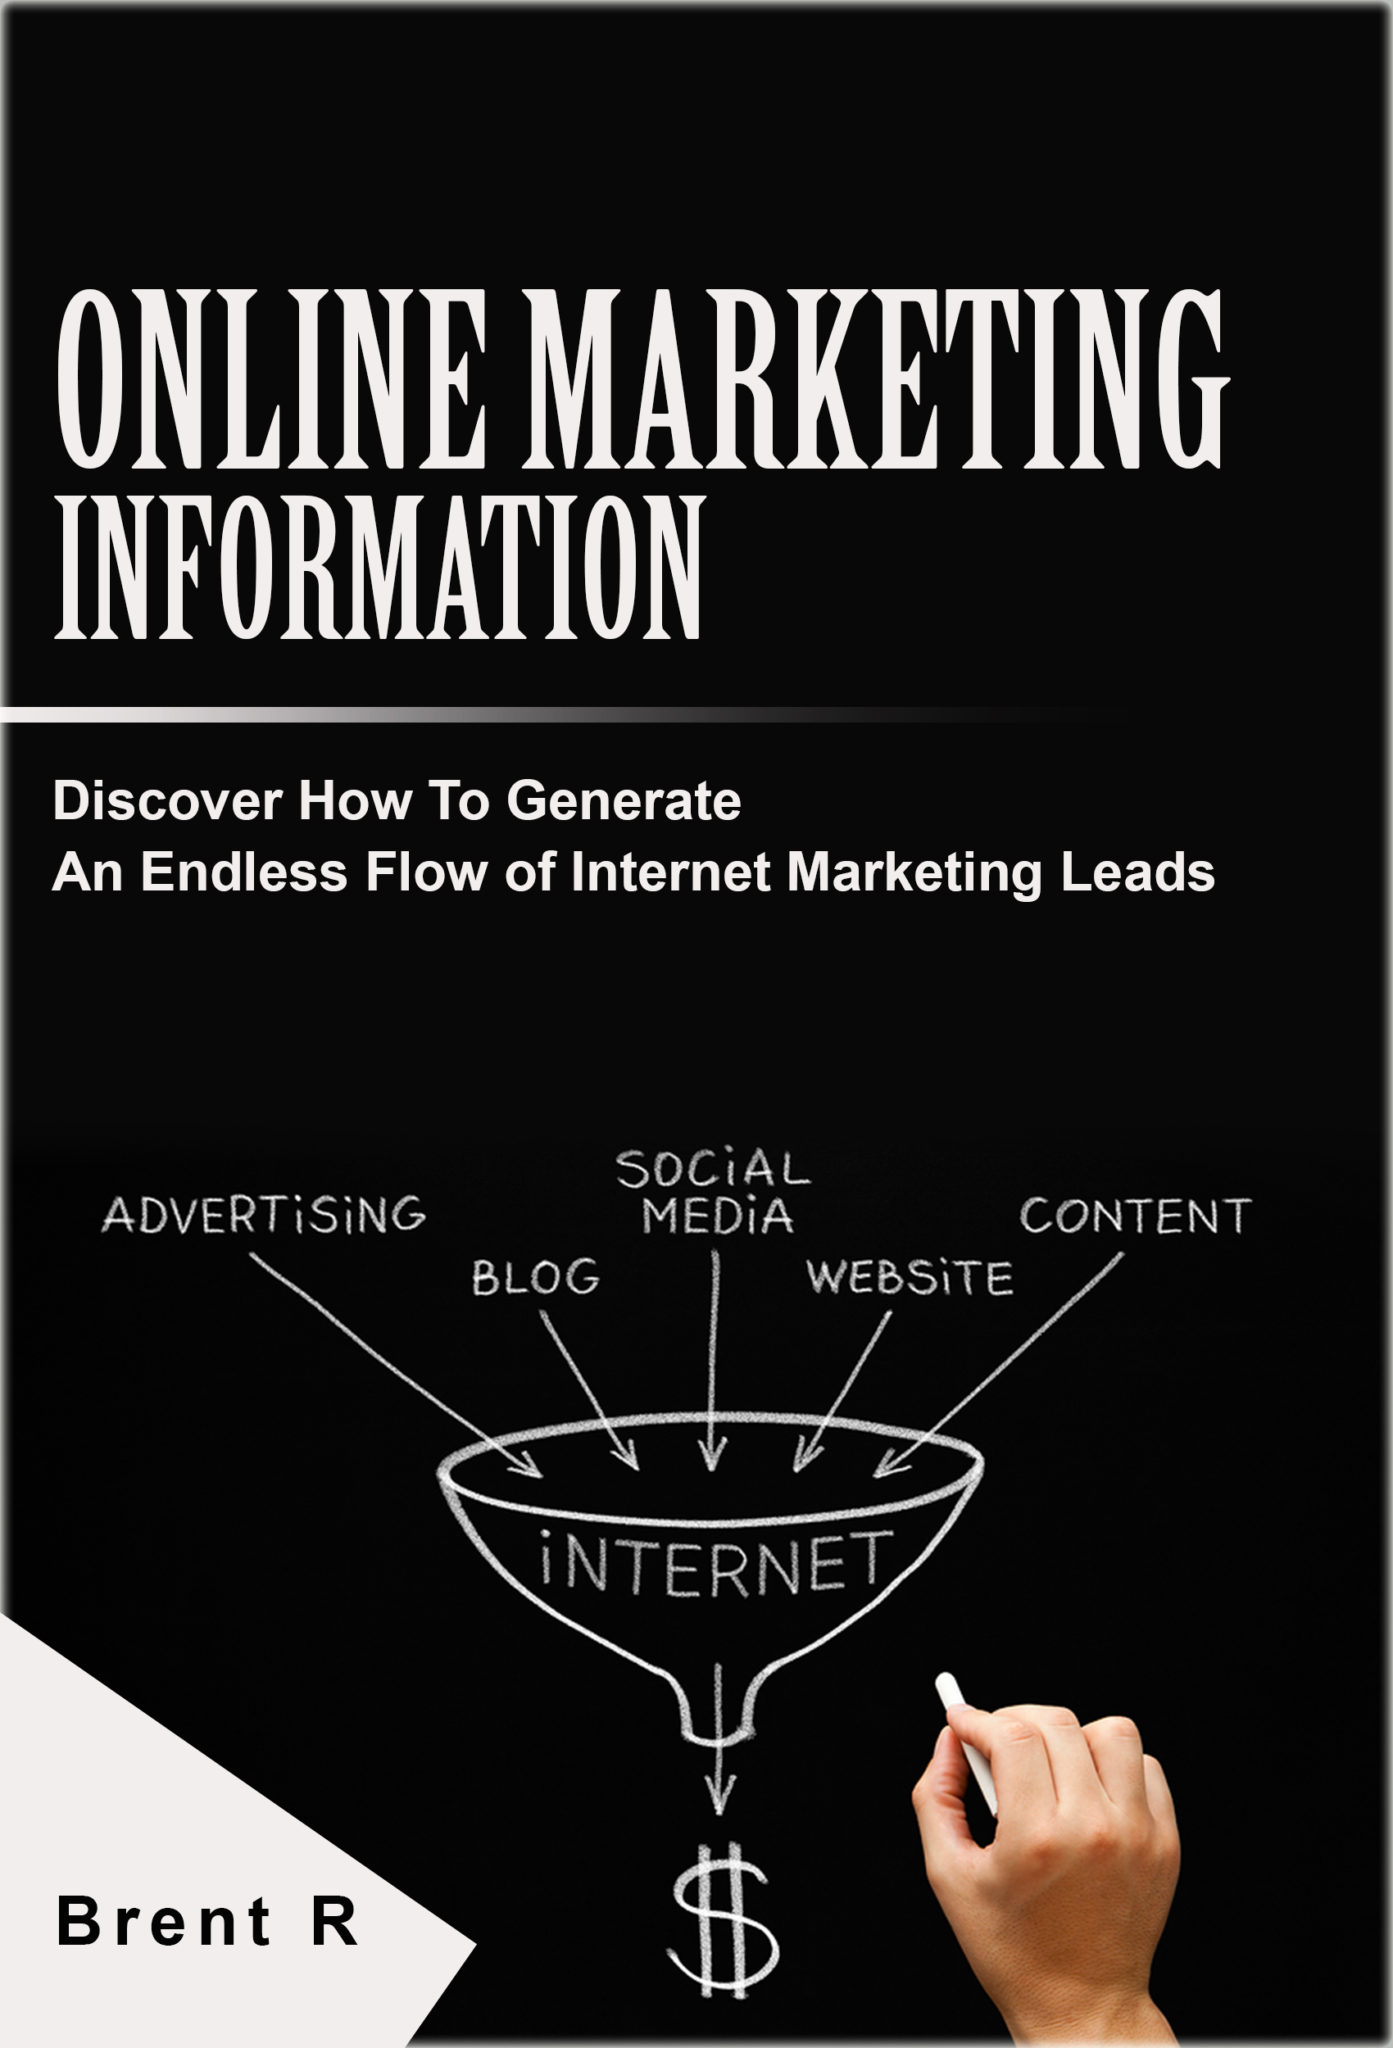 FREE: Online Marketing Information: Discover How To Generate An Endless Flow of Internet Marketing Leads by Brent R